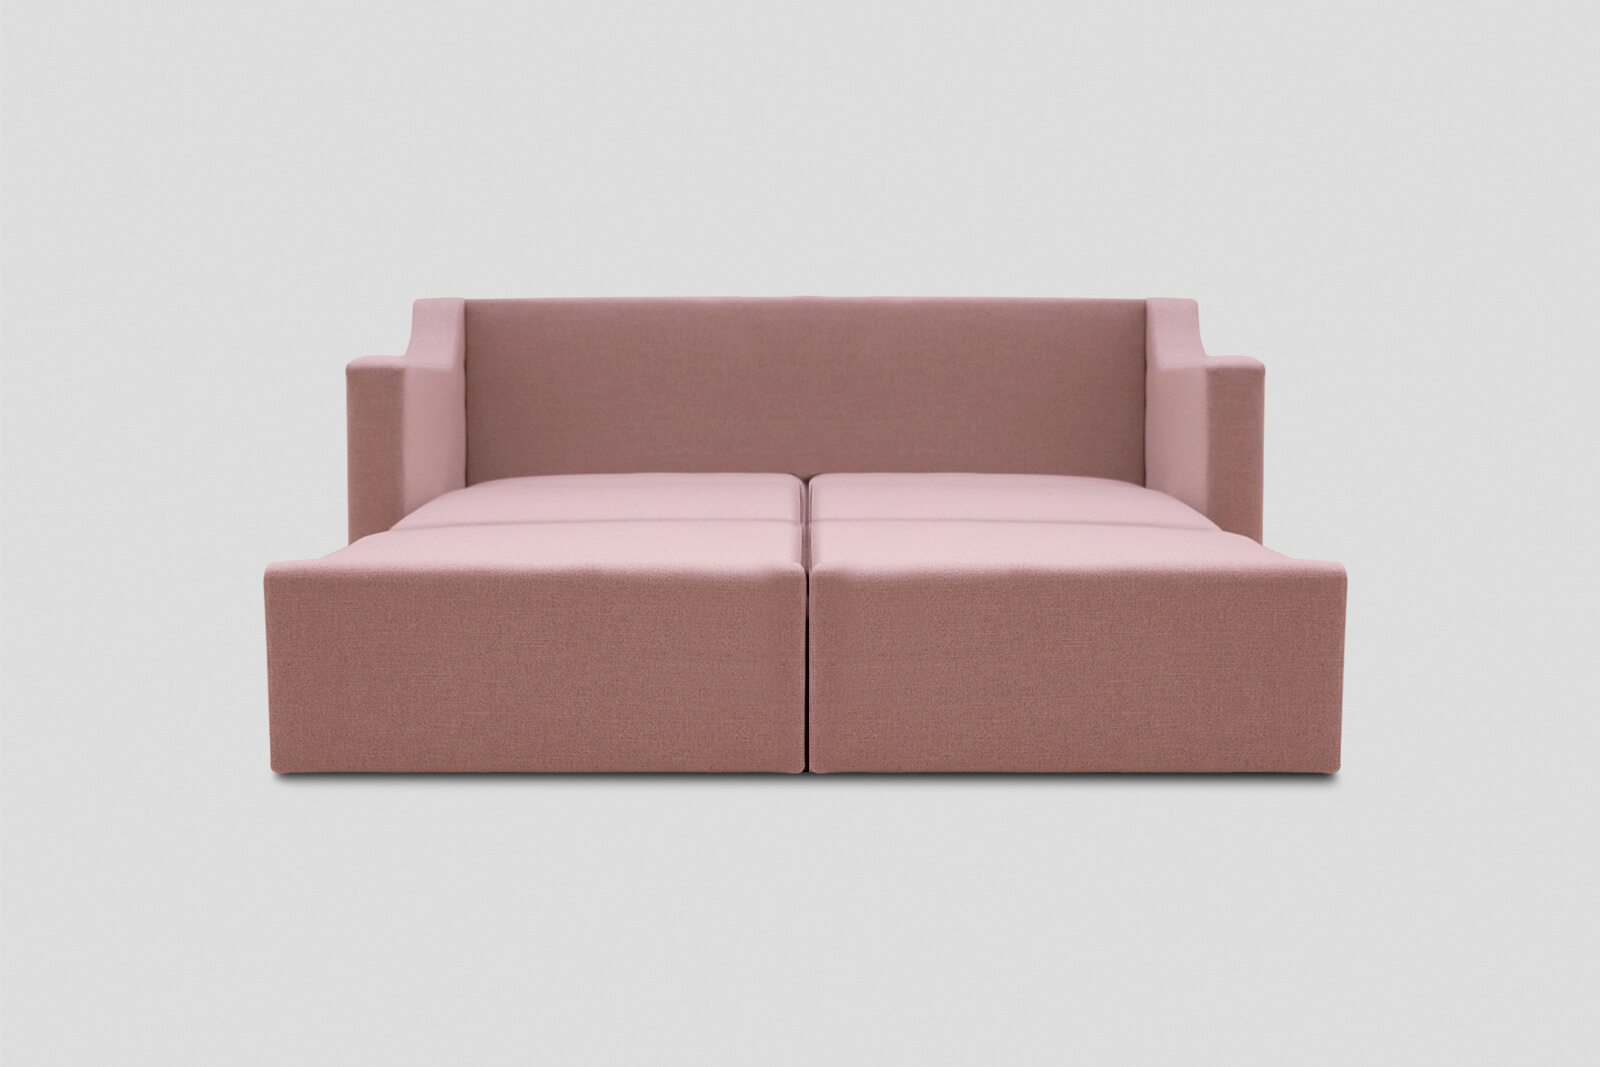 HBSB02-kingsize-sofa-bed-rosewater-front-bed